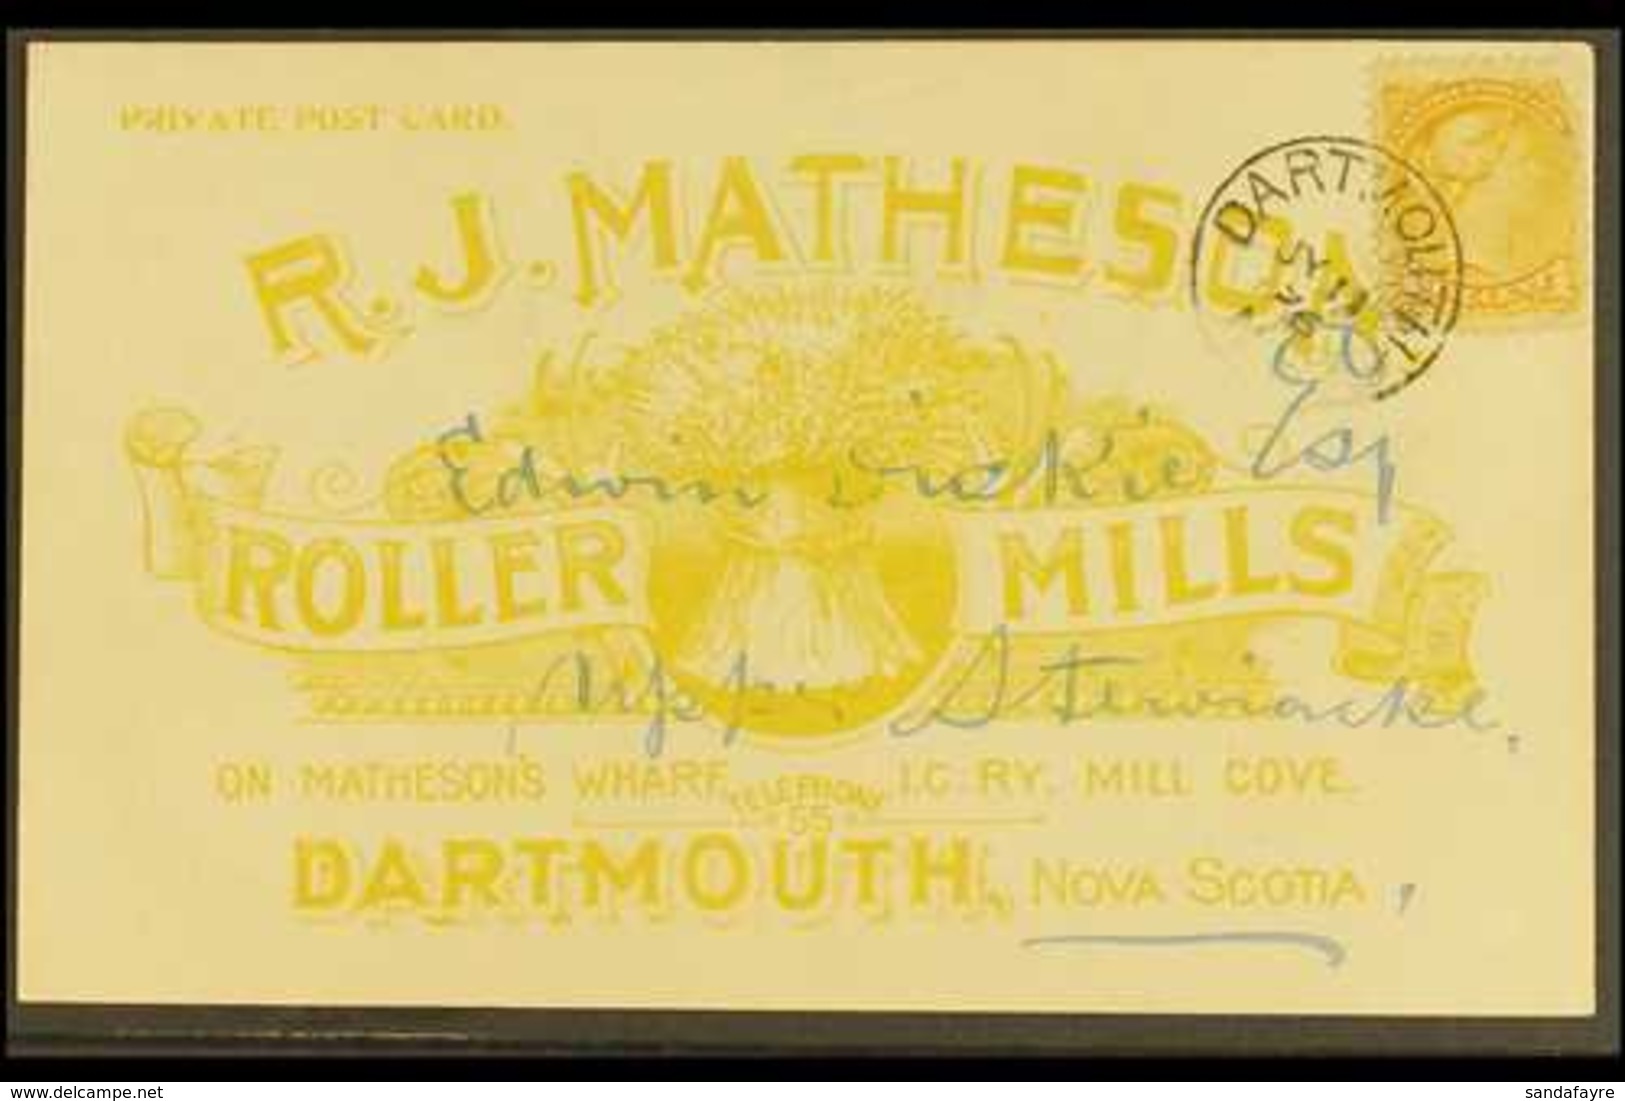 1896 Beautifully Illustrated Private Advertising Card, RJMatheson, Roller Mills, In Yellow, Franked 1c Yellow From Dartm - Autres & Non Classés